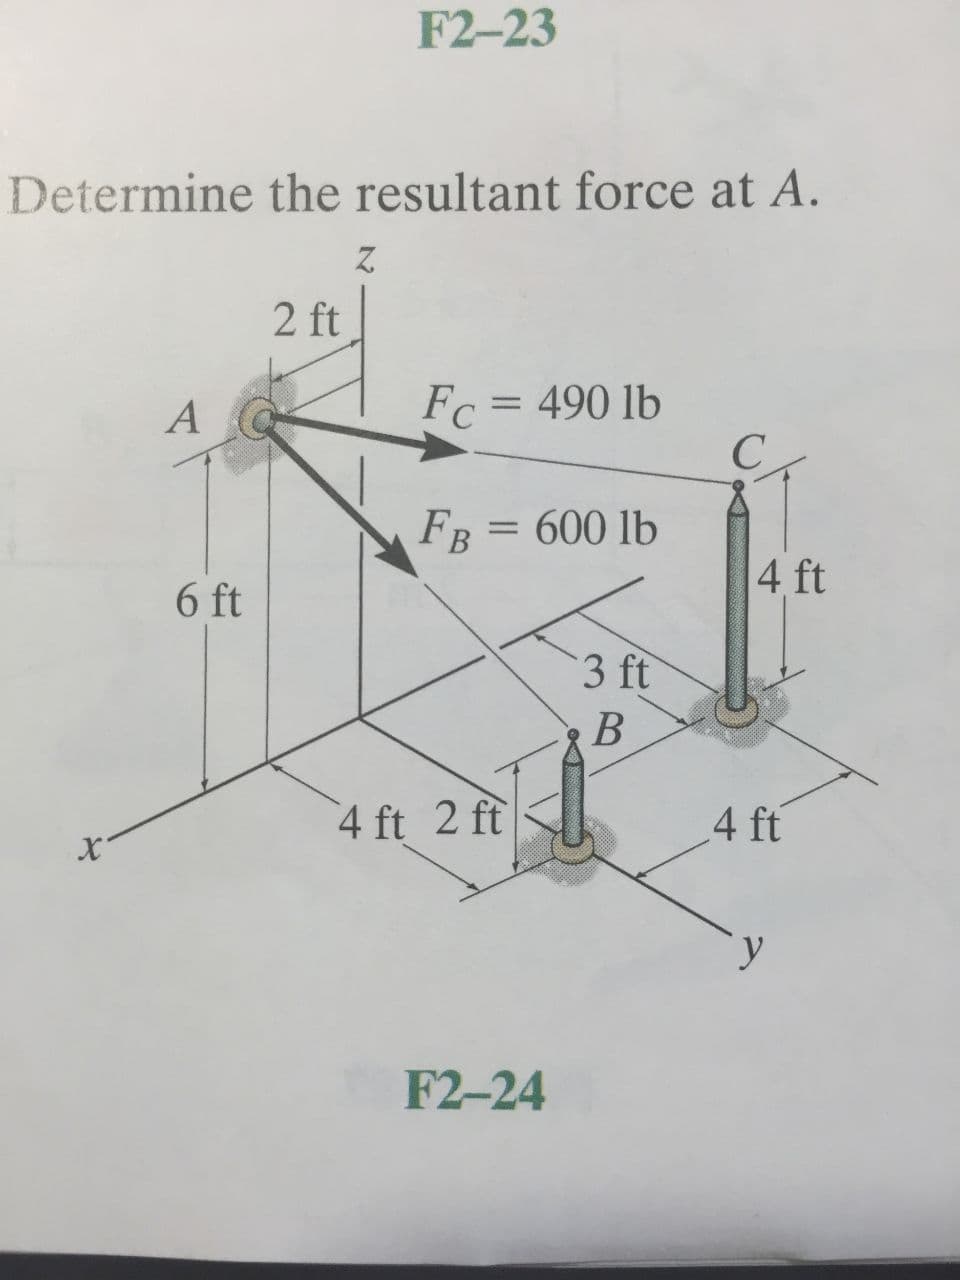 F2-23
Determine the resultant force at A.
Z.
2 ft
Fc = 490 lb
C
%3D
A
FR = 600 lb
6 ft
4 ft
3 ft
B
4 ft 2 ft
4 ft
y
F2-24
